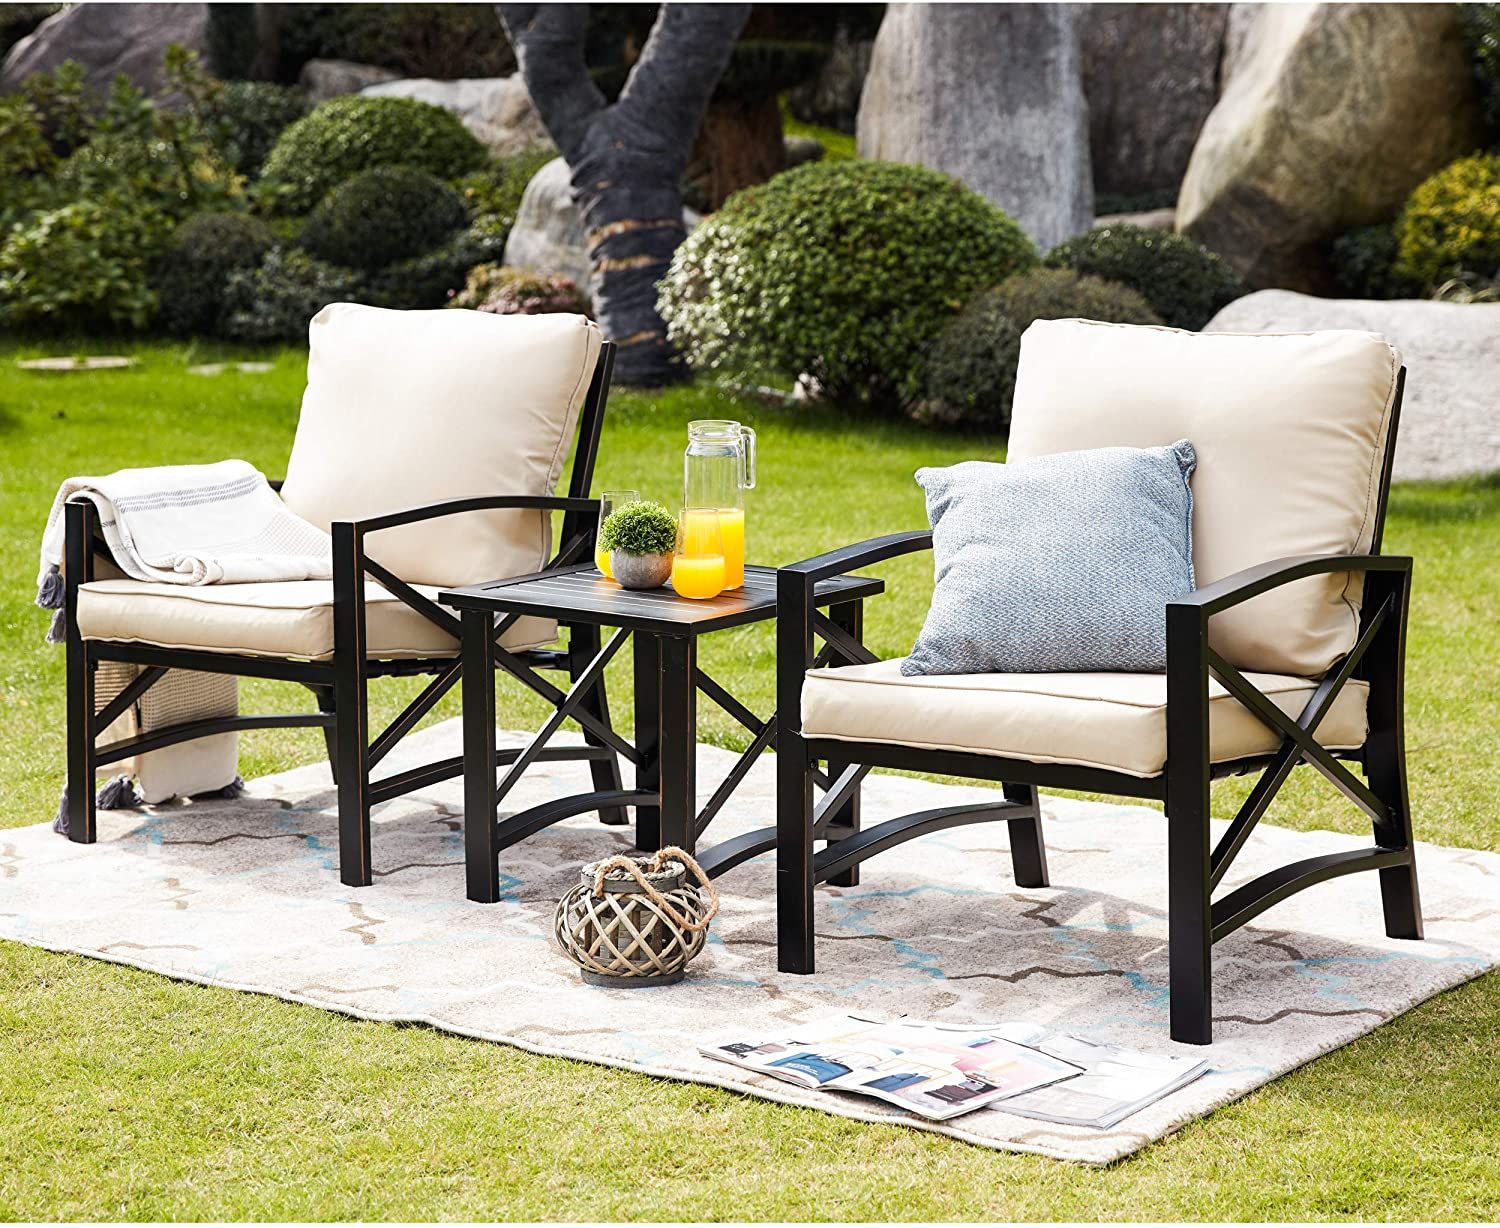 8 Best Patio Furniture Sets 2021 The, Low Profile Outdoor Patio Furniture